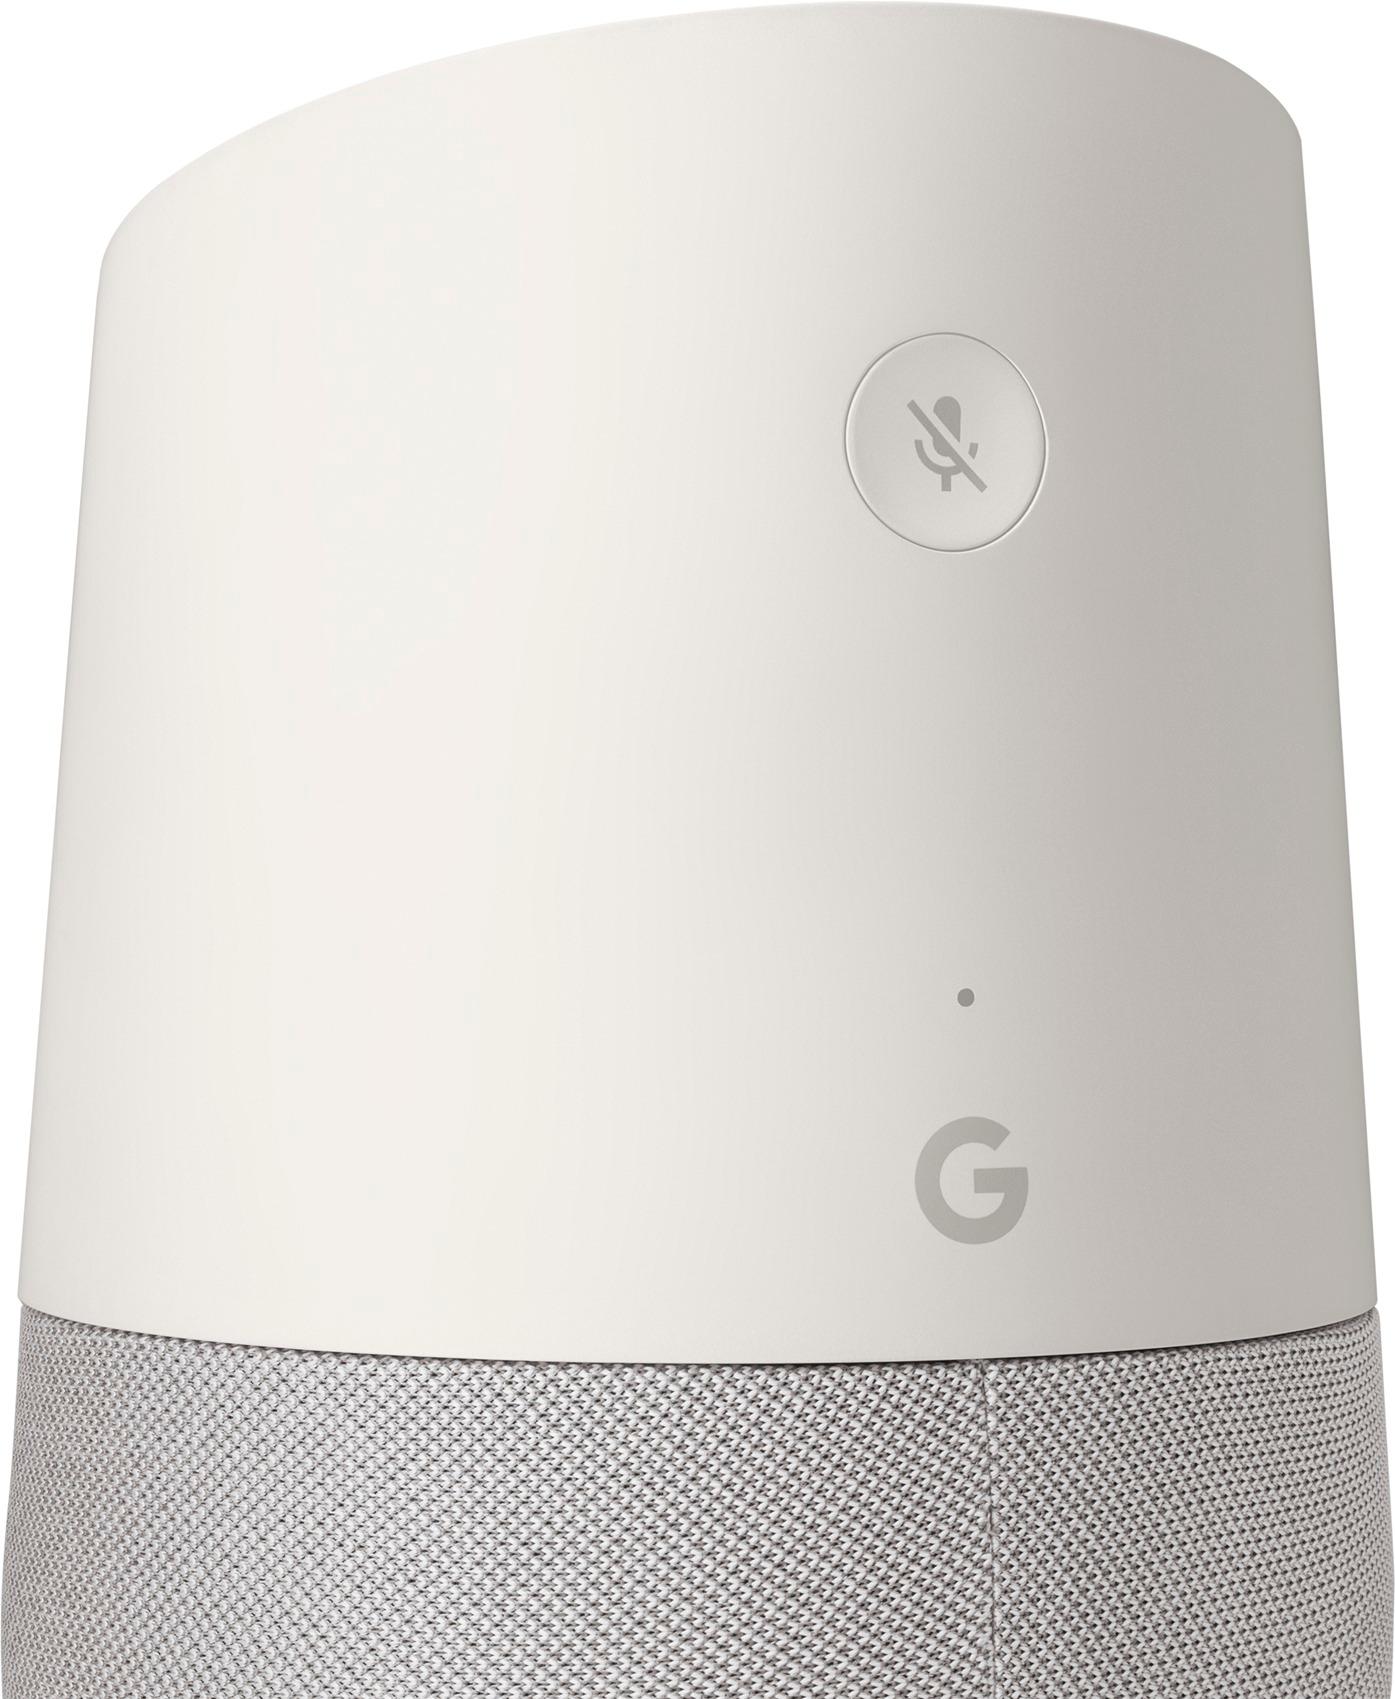 Best Buy: Home Smart Speaker with Google Assistant White/Slate fabric Home